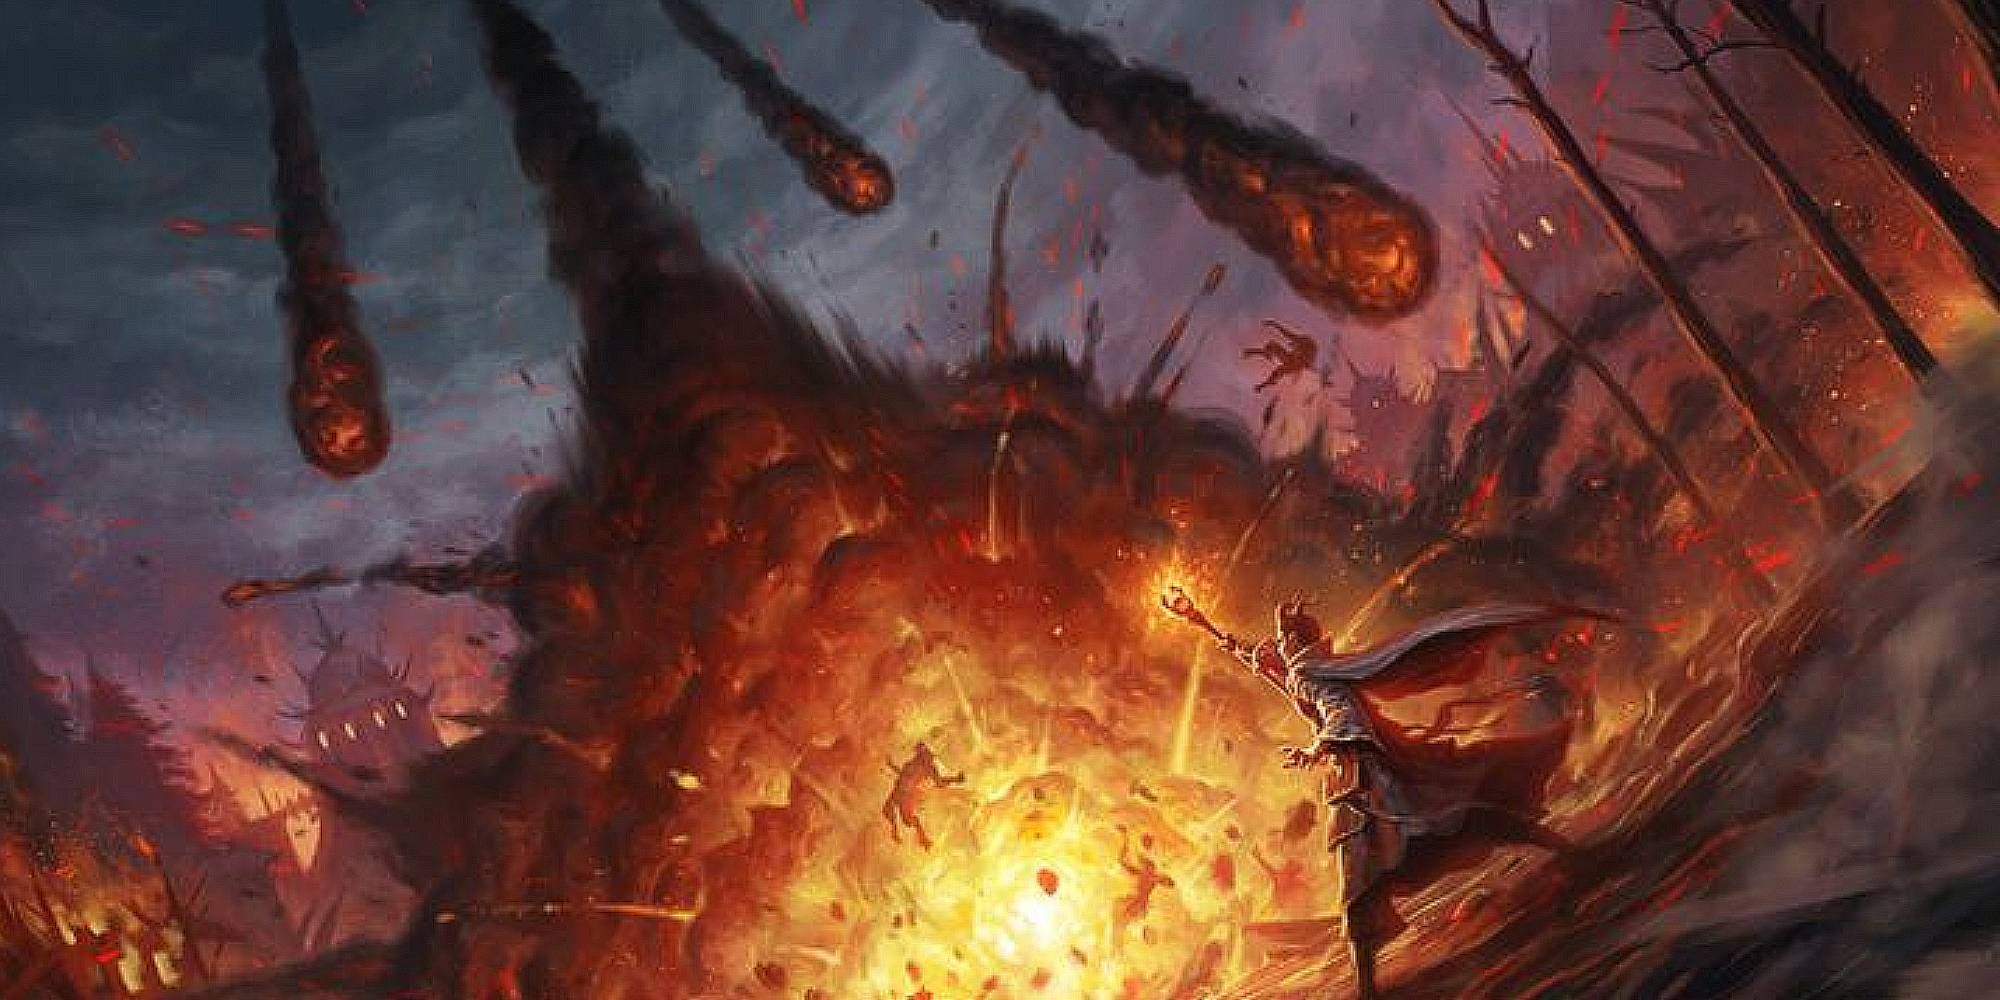 A storm of meteors falls upon a burnt forest as a figure holds a staff up